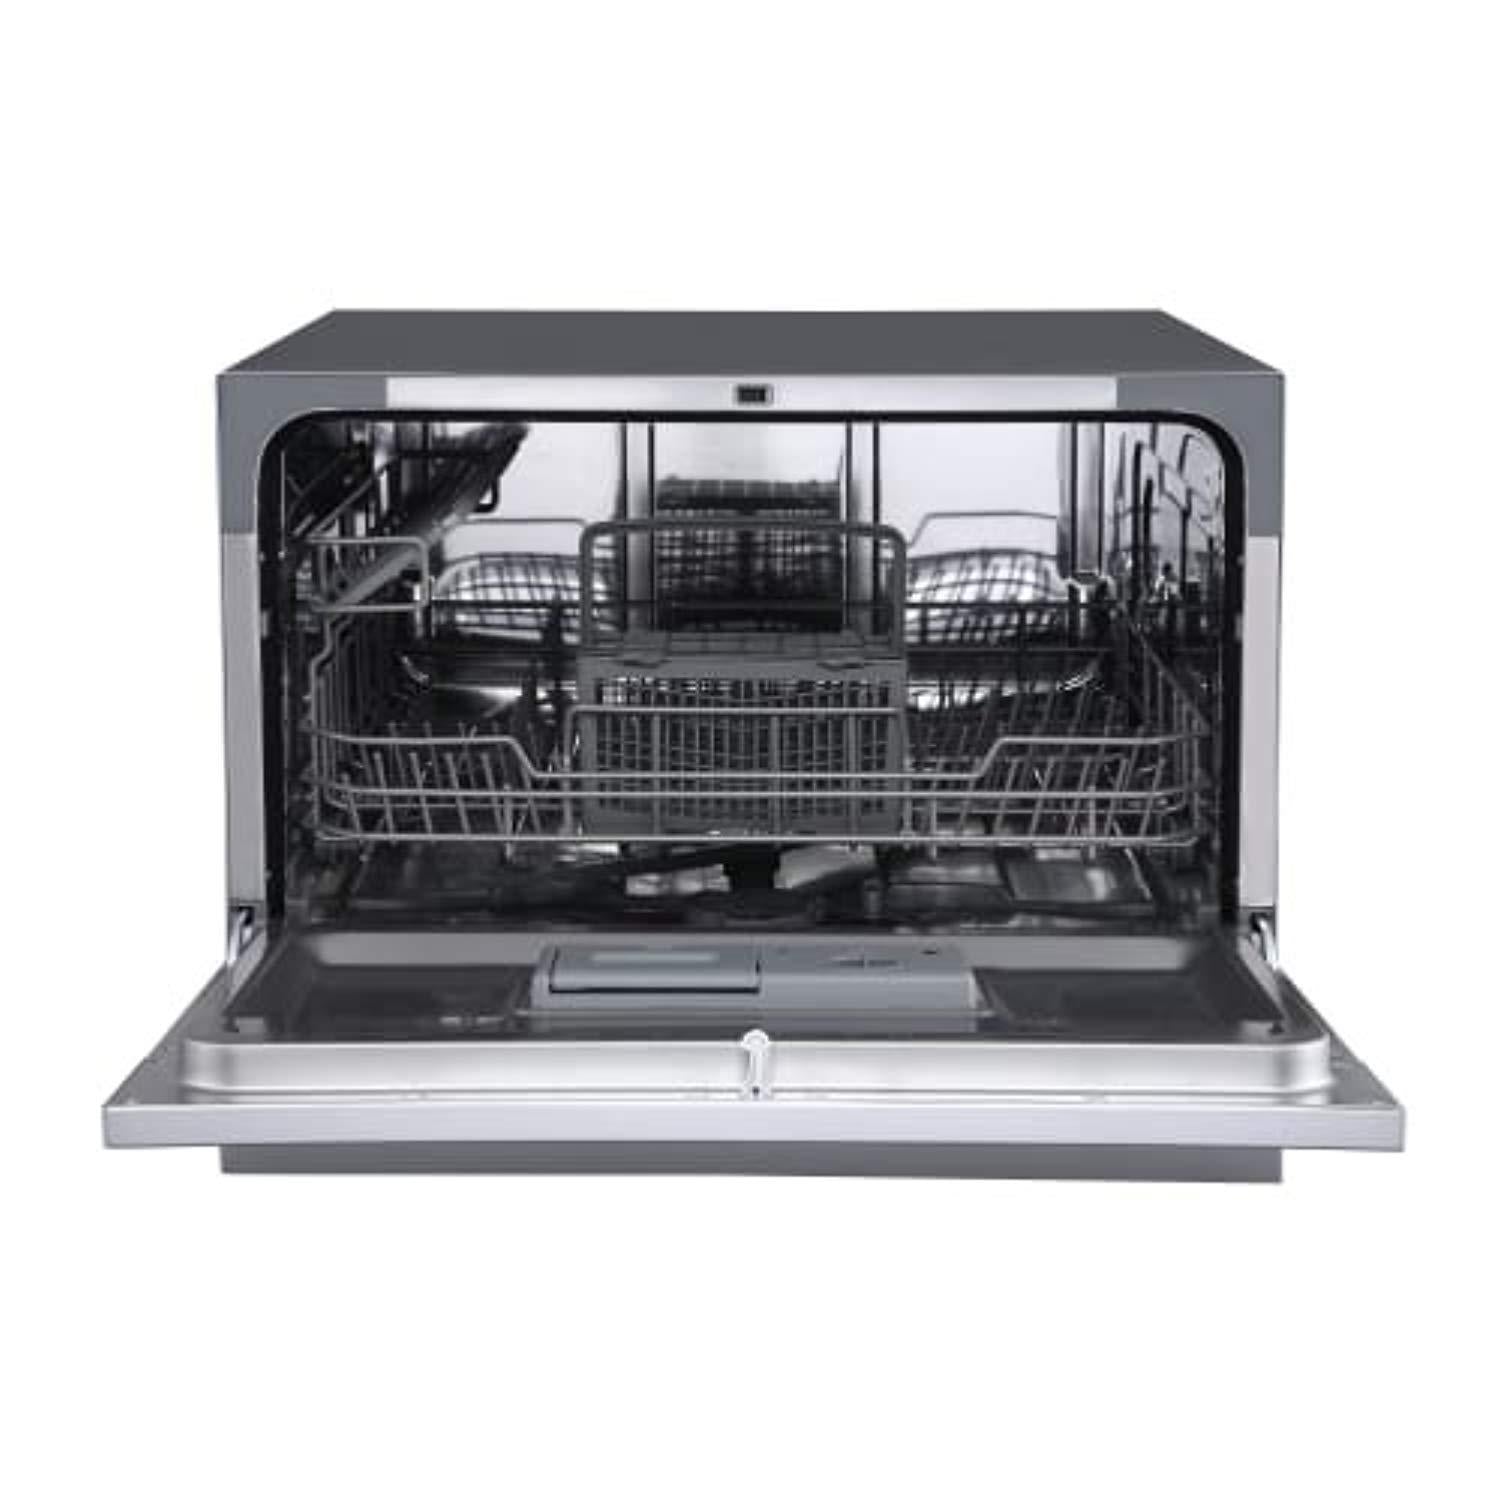 EdgeStar DWP62SV 6 Place Setting Energy Star Rated Portable Countertop Dishwasher - Silver